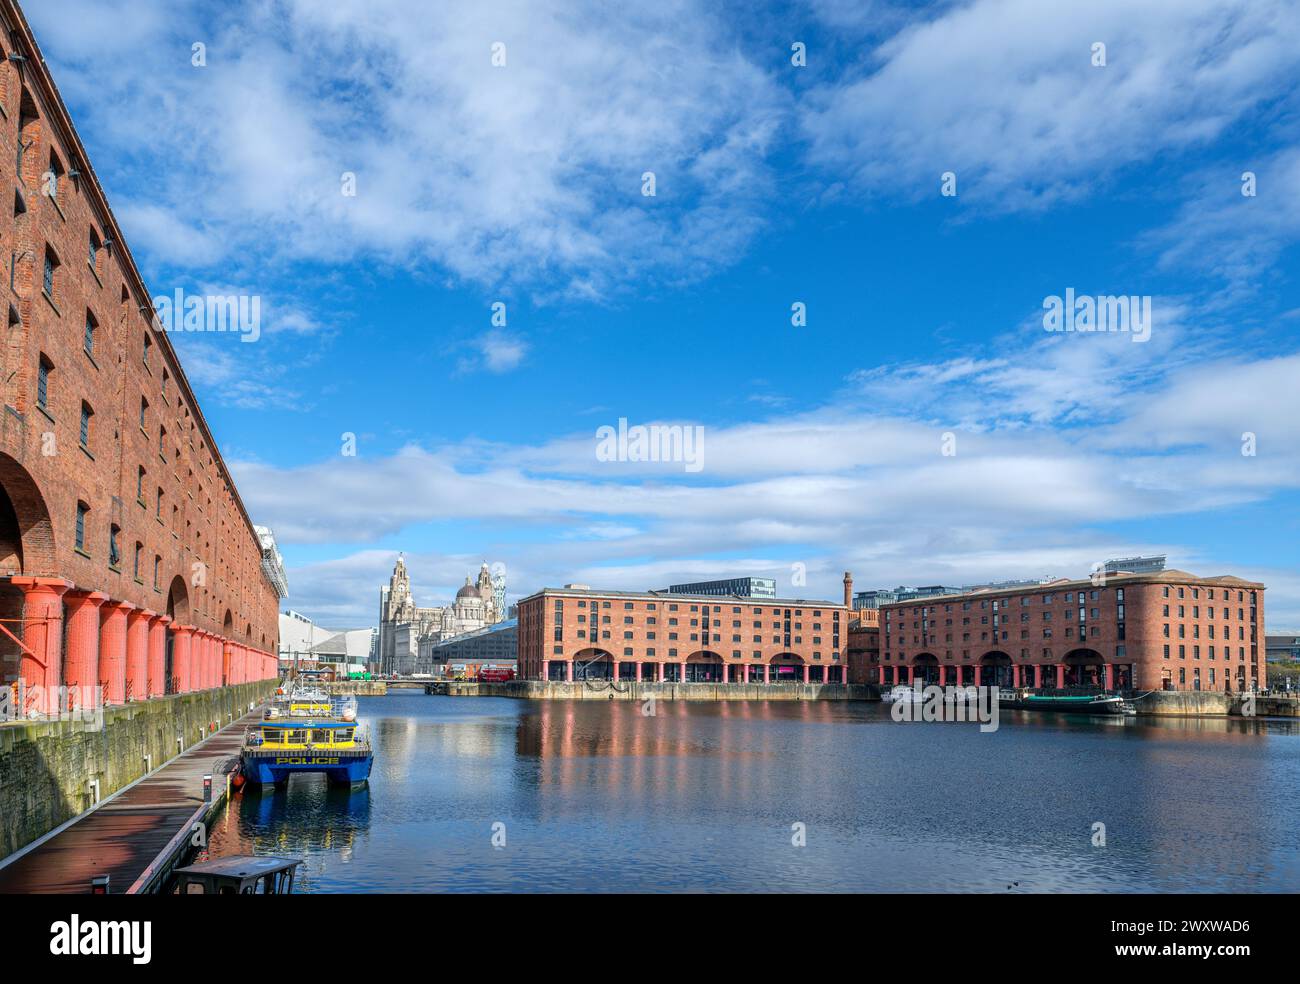 Albert Dock looking towards the Three Graces and the Museum of Liverpool, Liverpool, Merseyside, England, UK Stock Photo